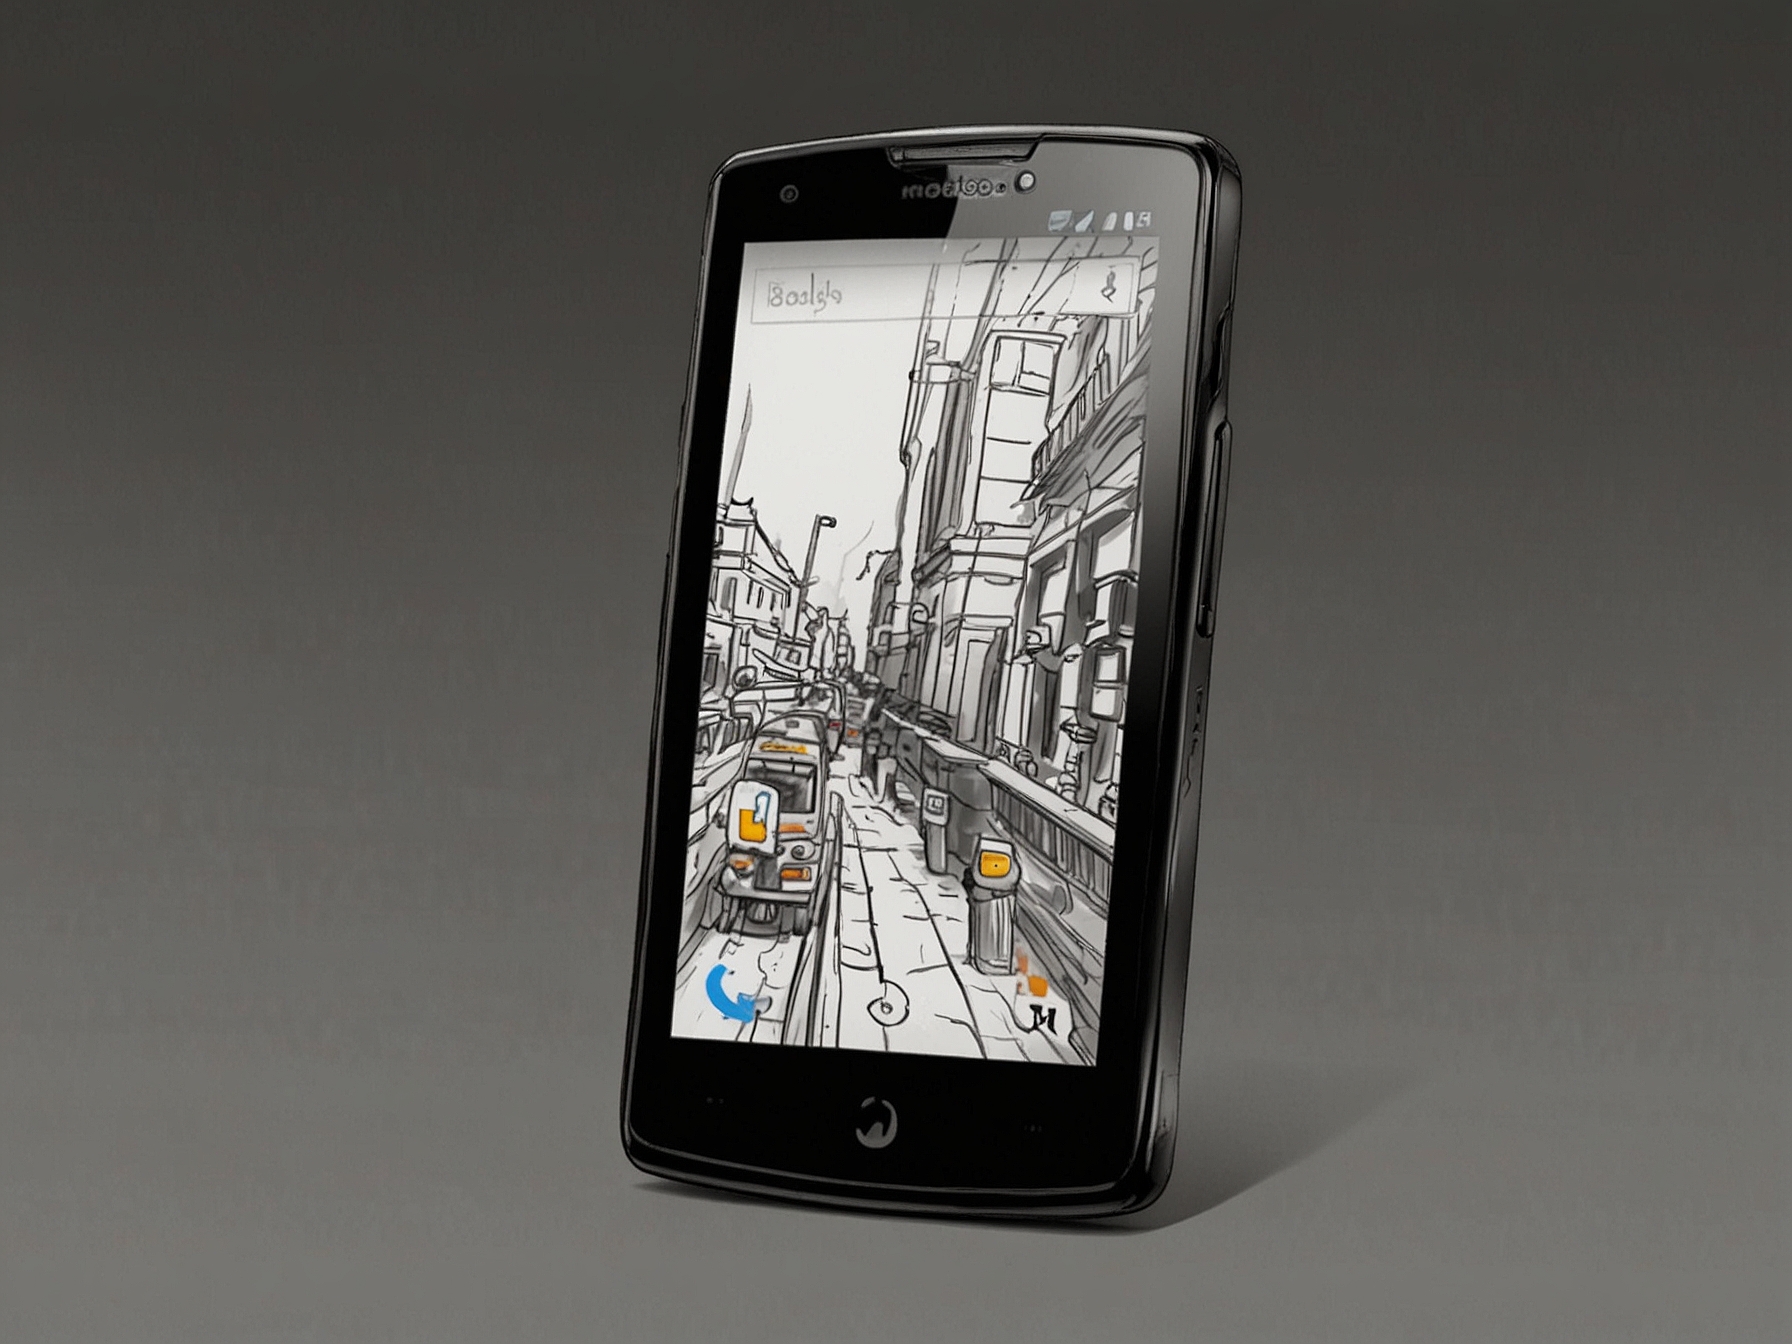 A promotional visual from Motorola India’s social media campaign, generating excitement and anticipation among tech enthusiasts for the upcoming Razr 50 Ultra.